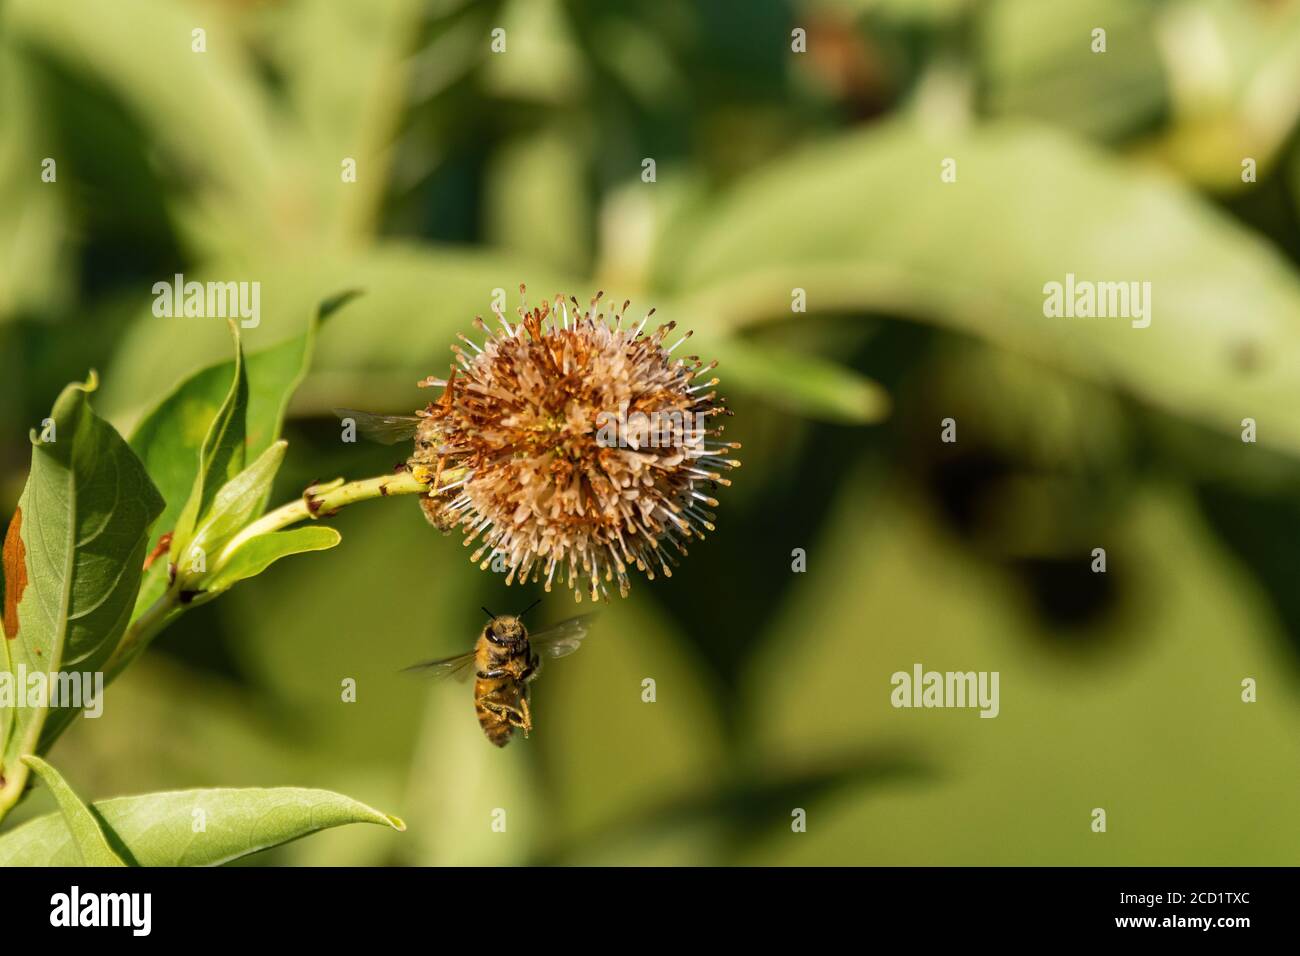 A Honeybee showing is cute face and dangling legs as it hovers underneath a Common Buttonbush flower that has begun to wilt in the heat of summer. Stock Photo